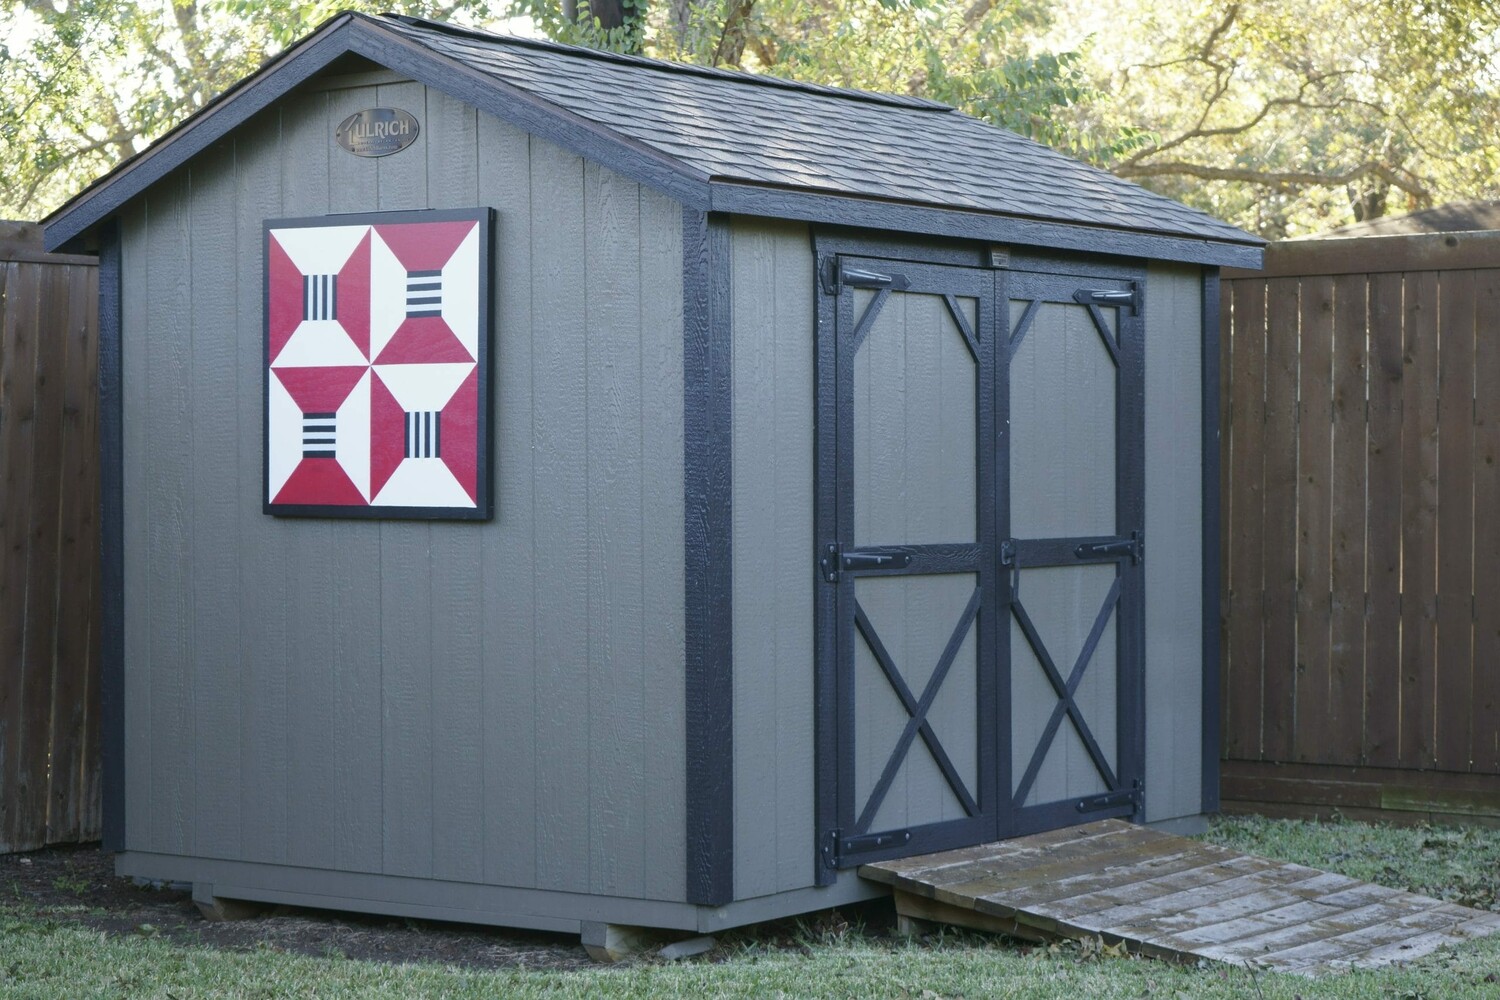 Ulrich shed with barn quilt